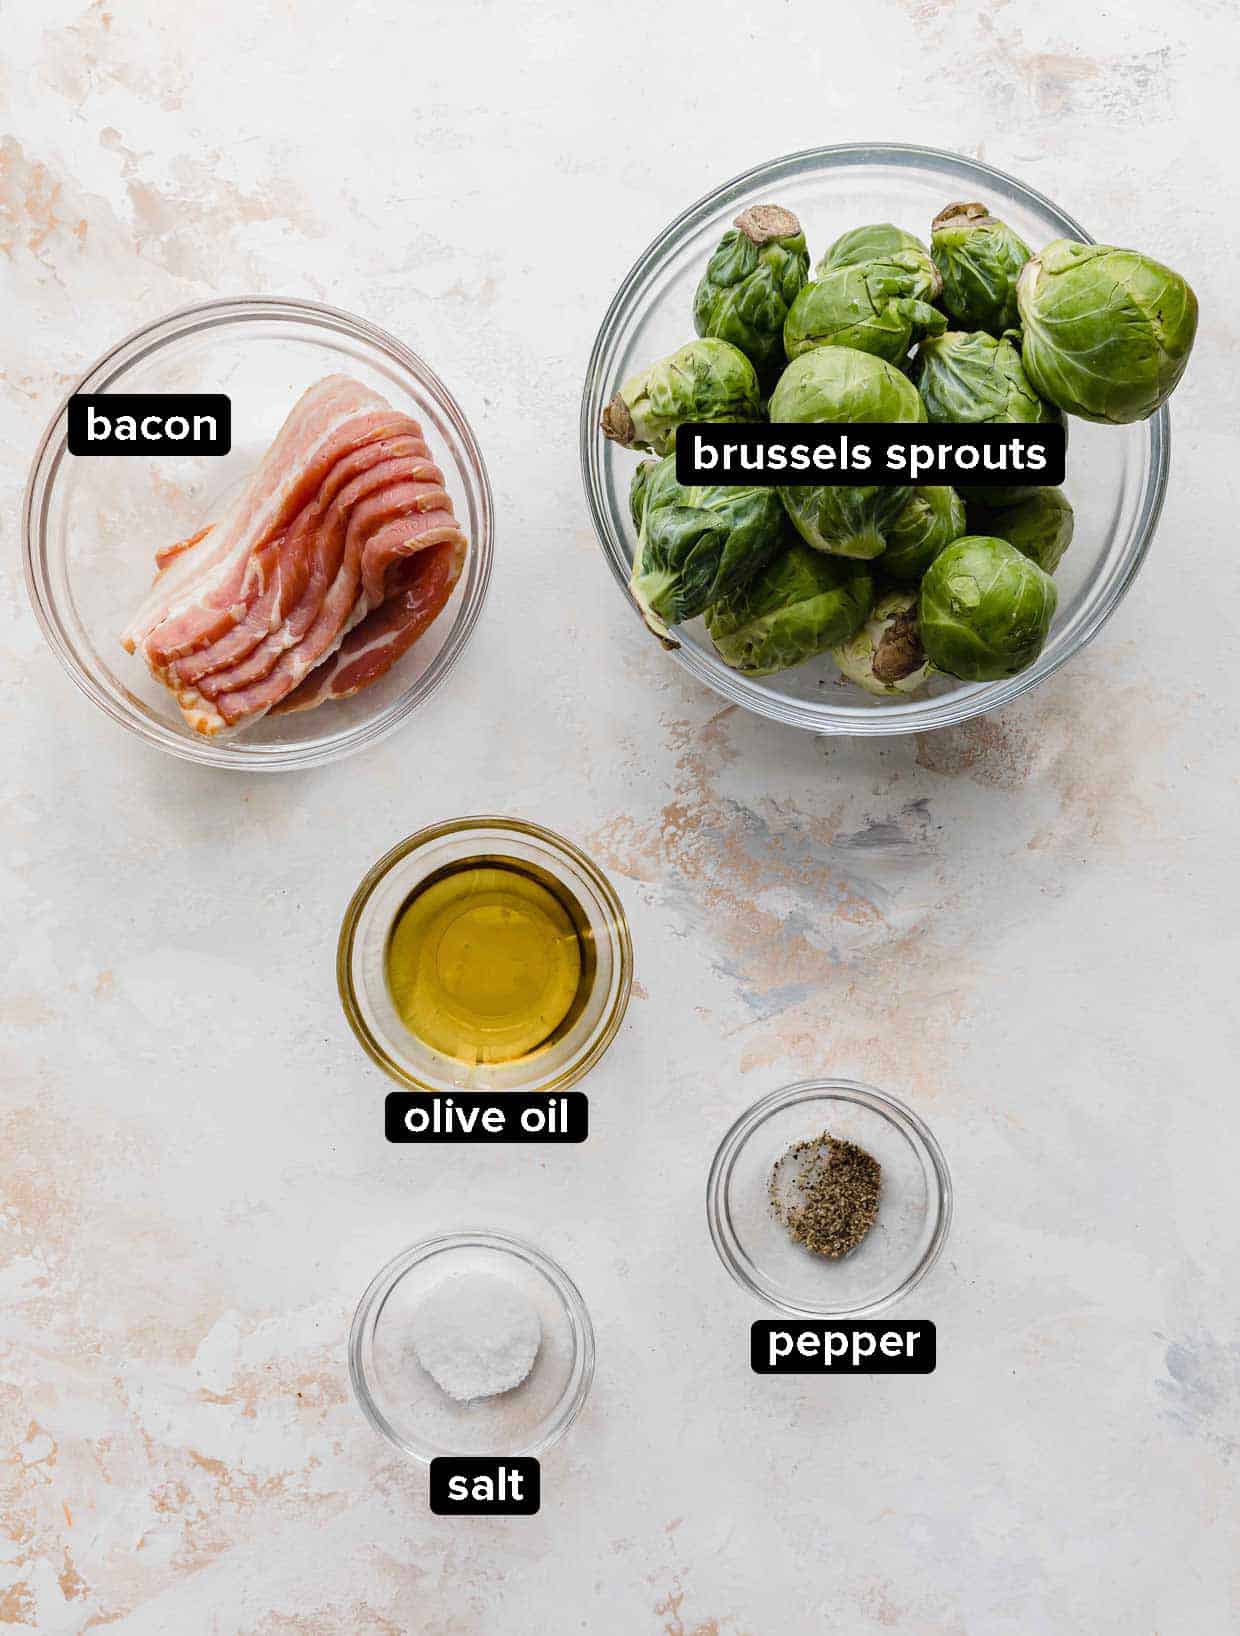 Roasted Brussels Sprouts with Bacon ingredients portioned into glass bowls on a white background; bacon, Brussels sprouts, olive oil, salt and pepper.